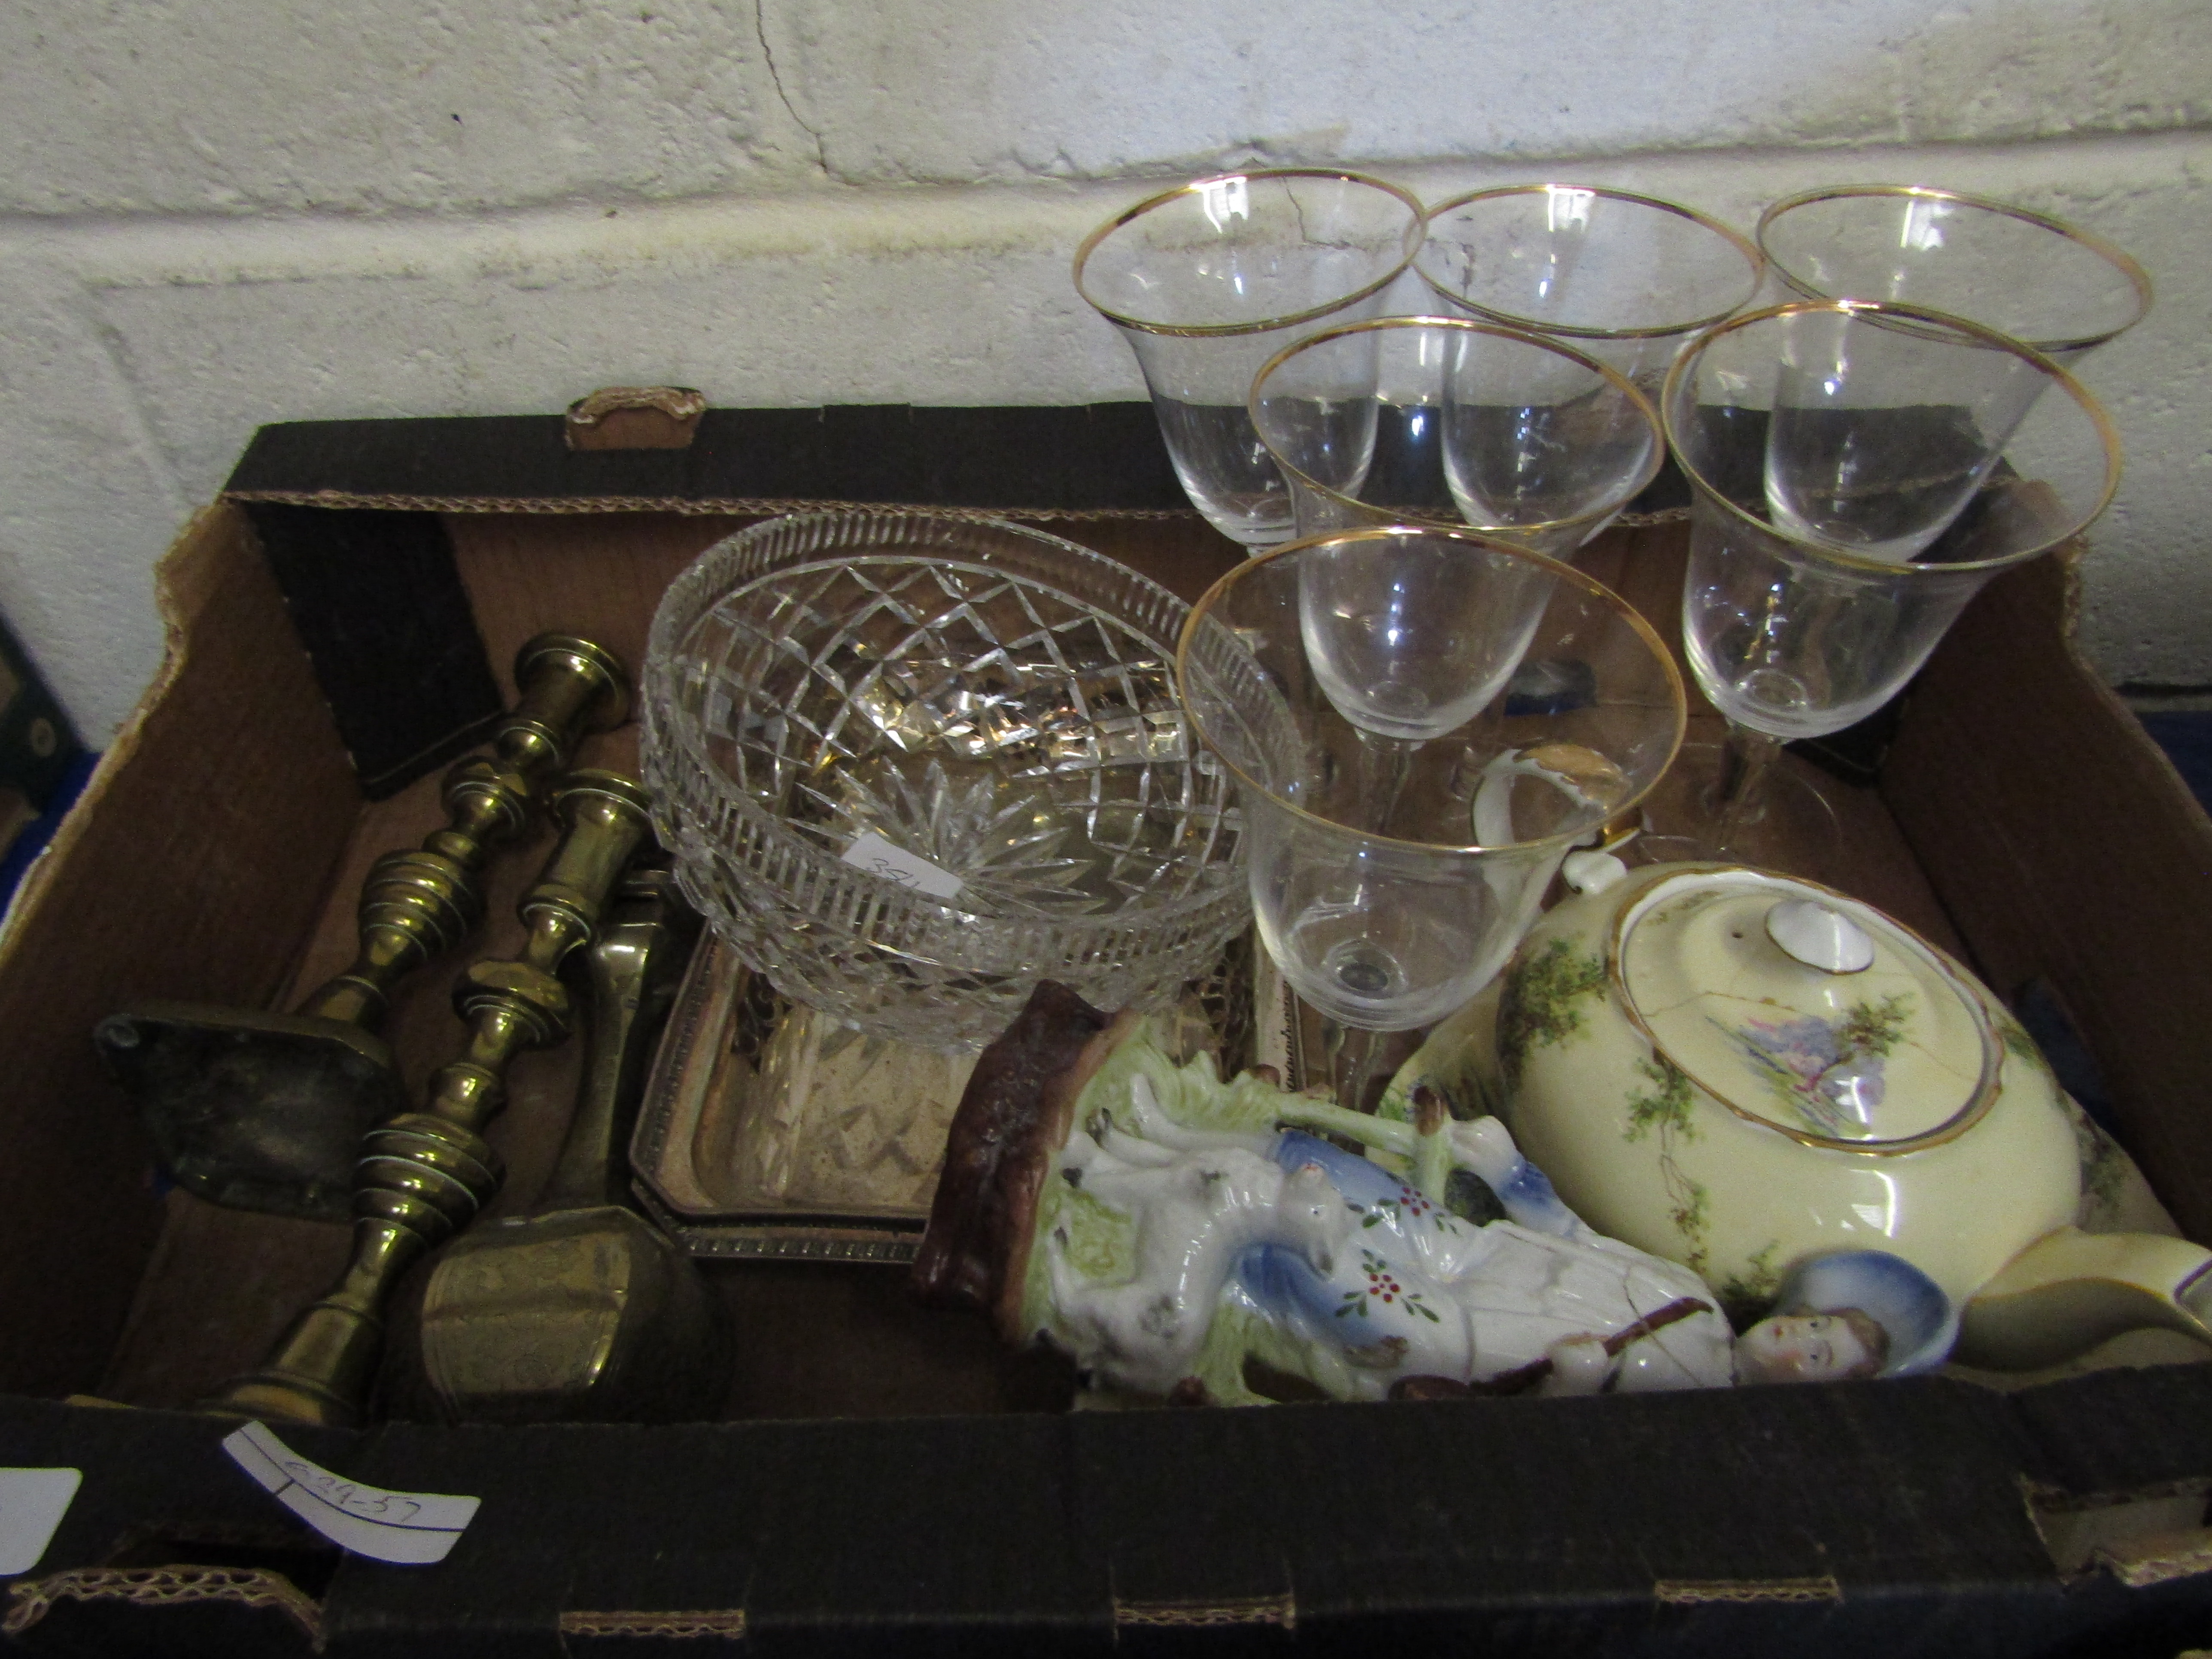 BOX CONTAINING A PAIR OF BRASS CANDLE STICKS, SIX MODERN WINE GLASSES, CUT GLASS BOWL ETC